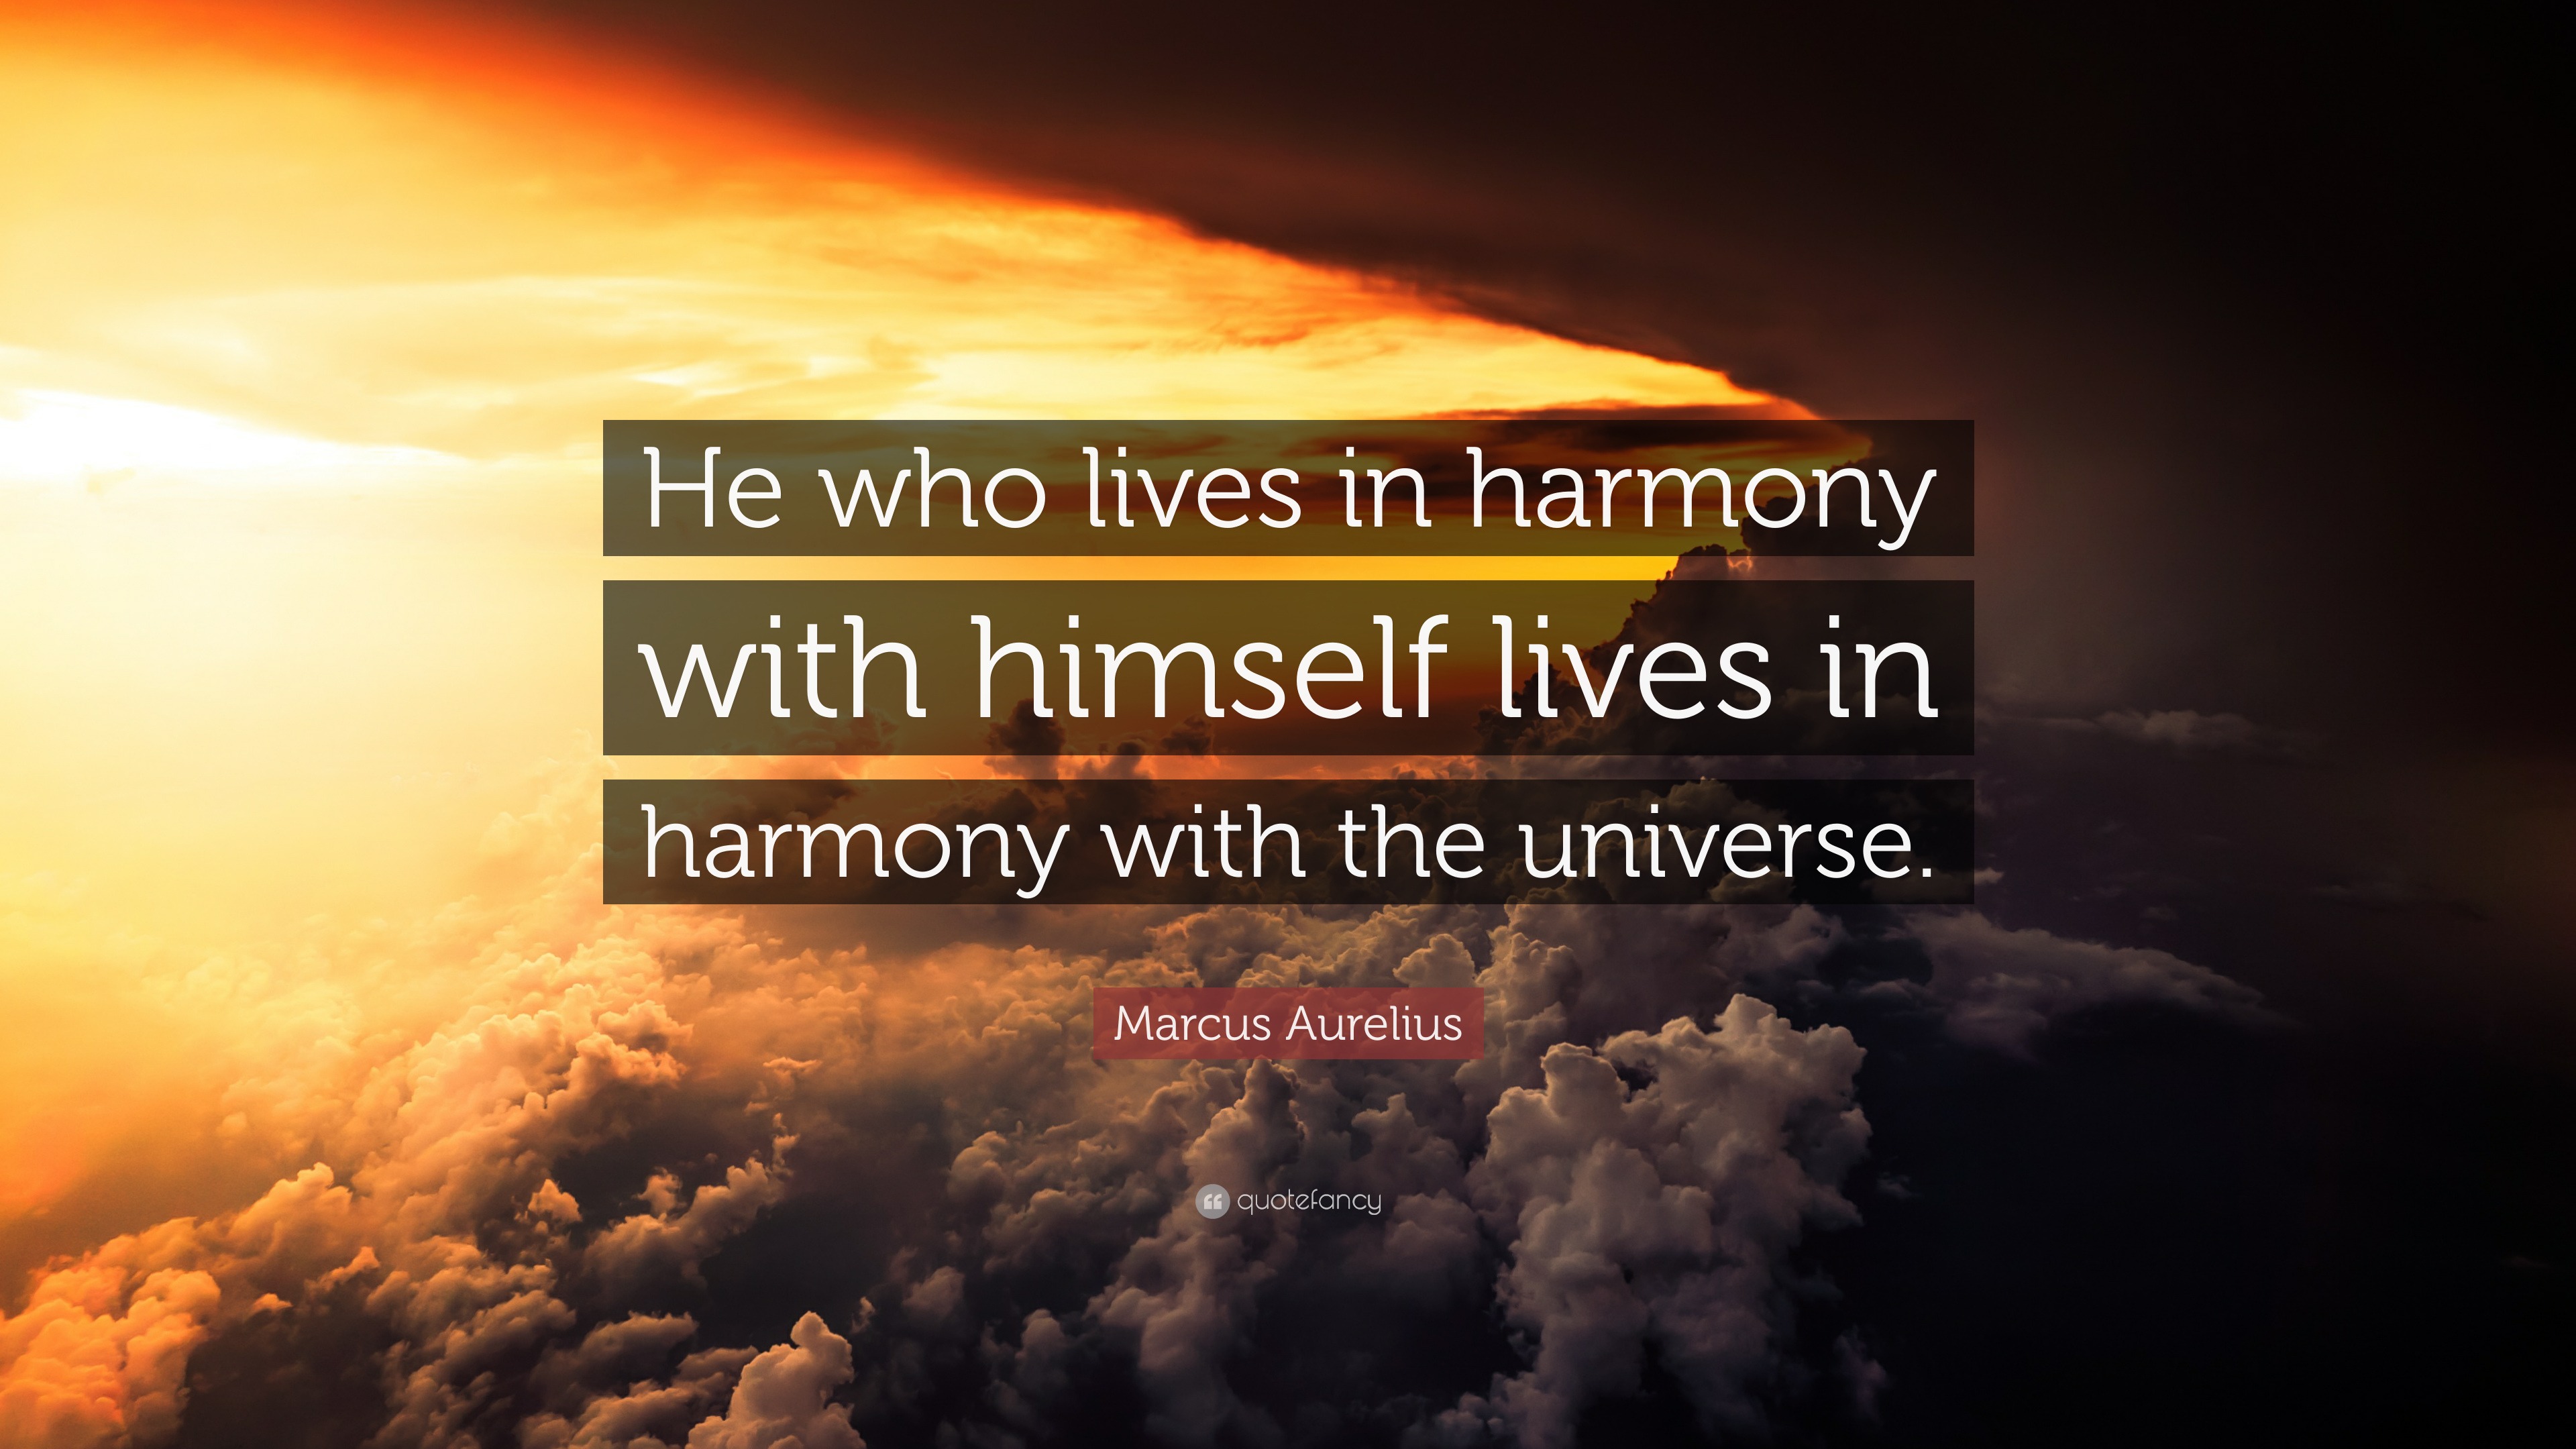 Marcus Aurelius Quote: “He who lives in harmony with himself lives in ...